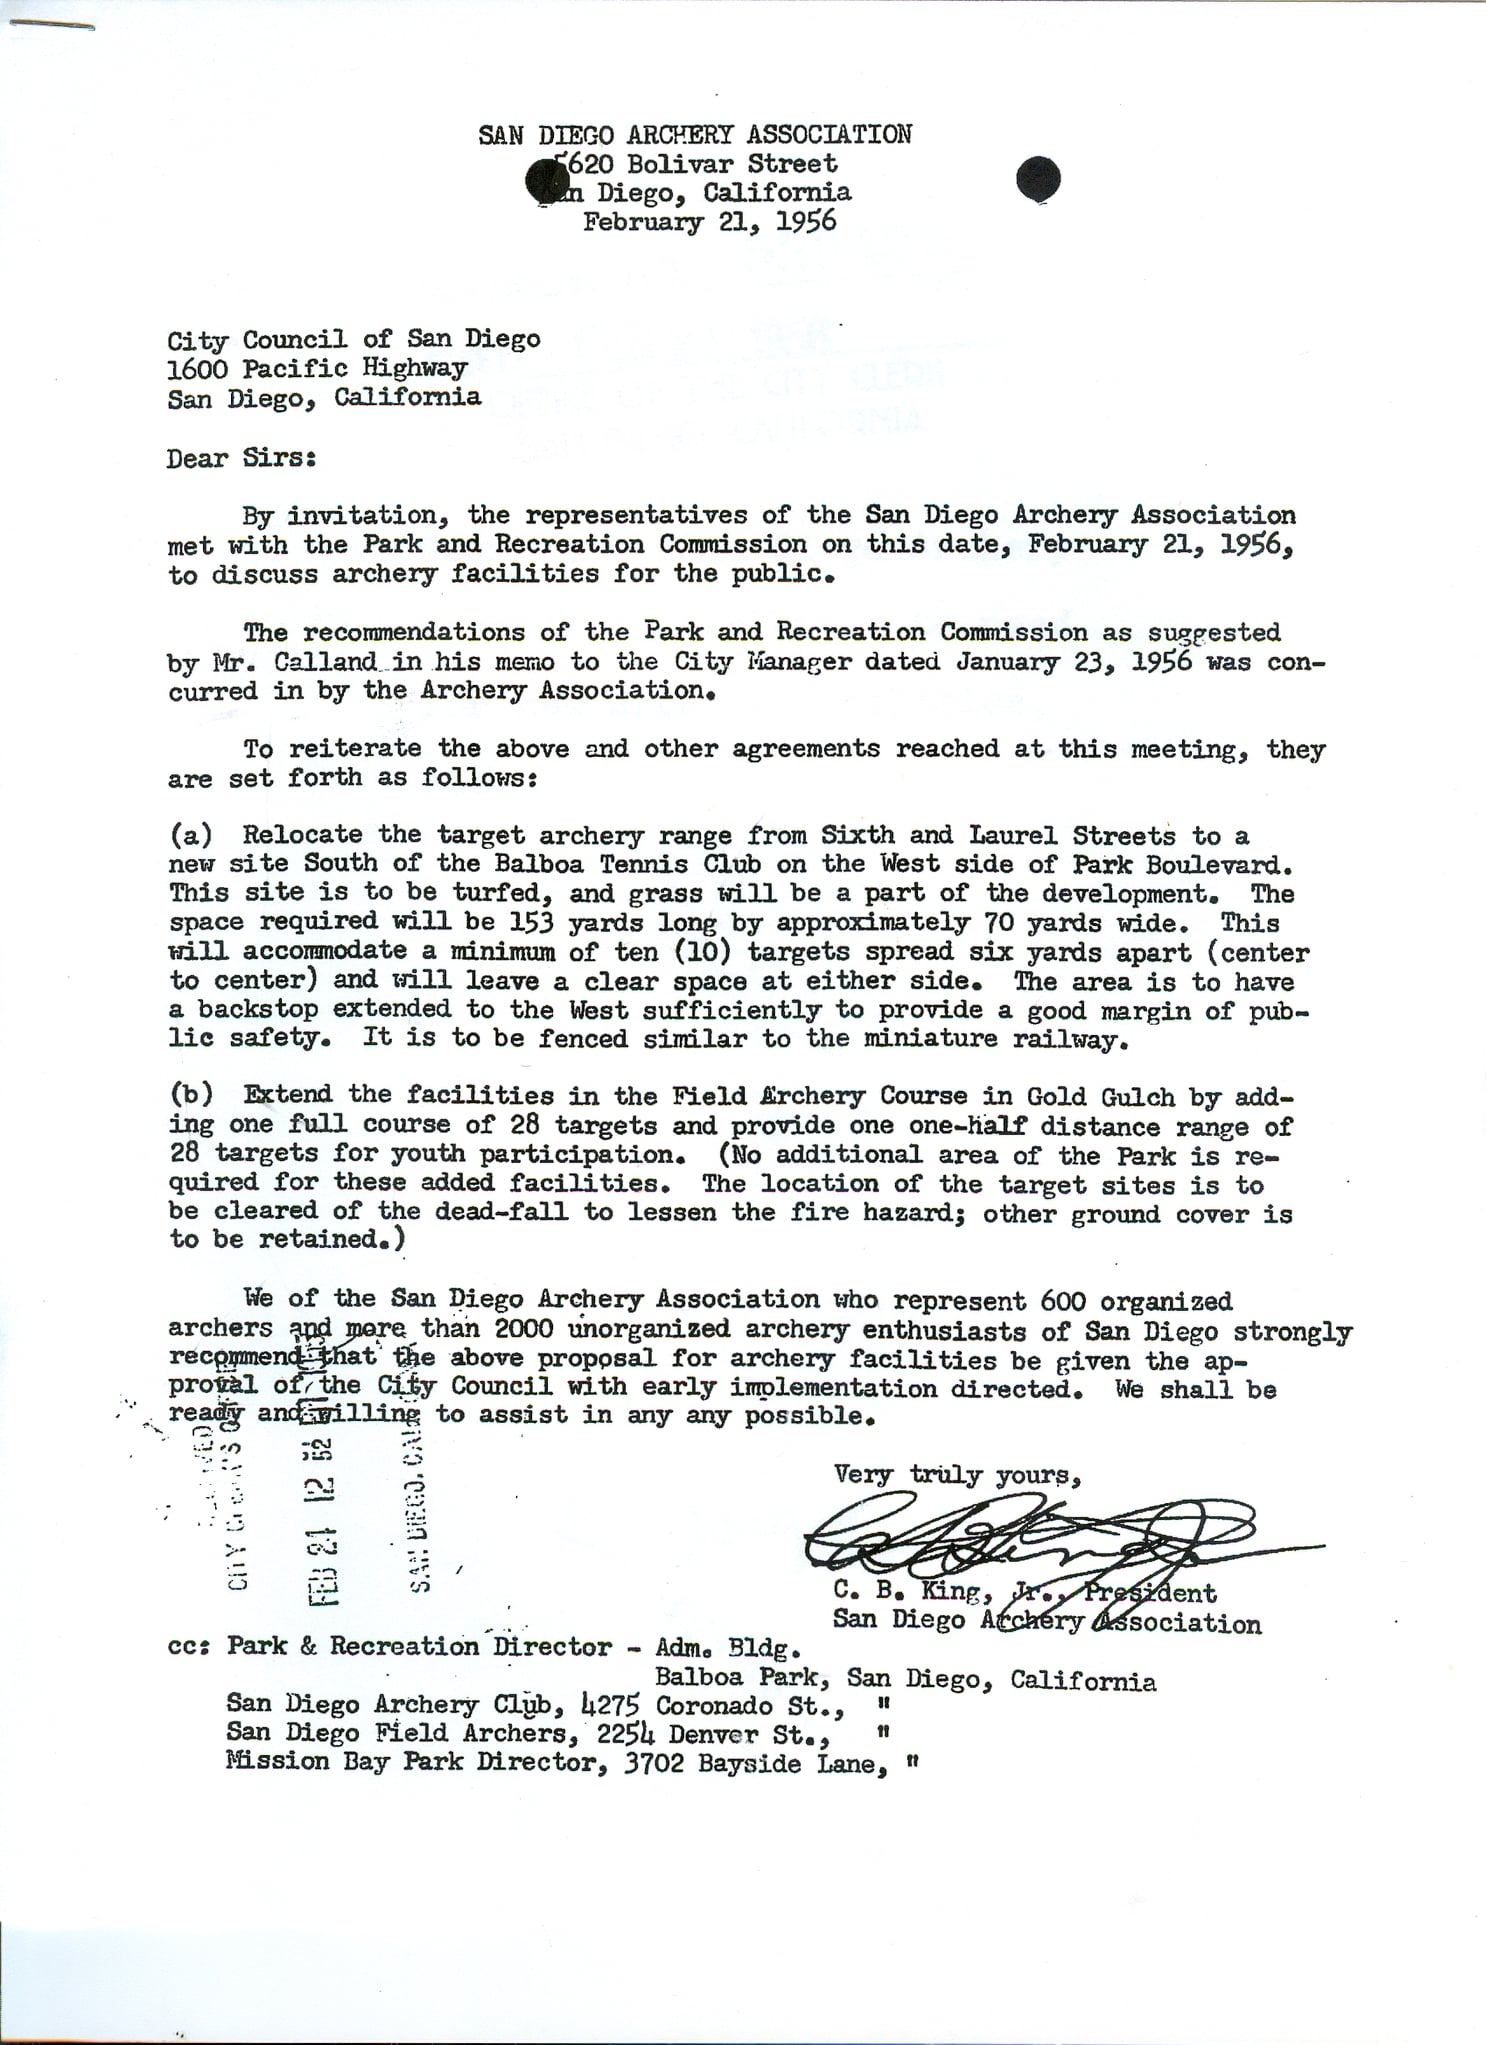 1956 SDA Letters Related to Target Range Relocations